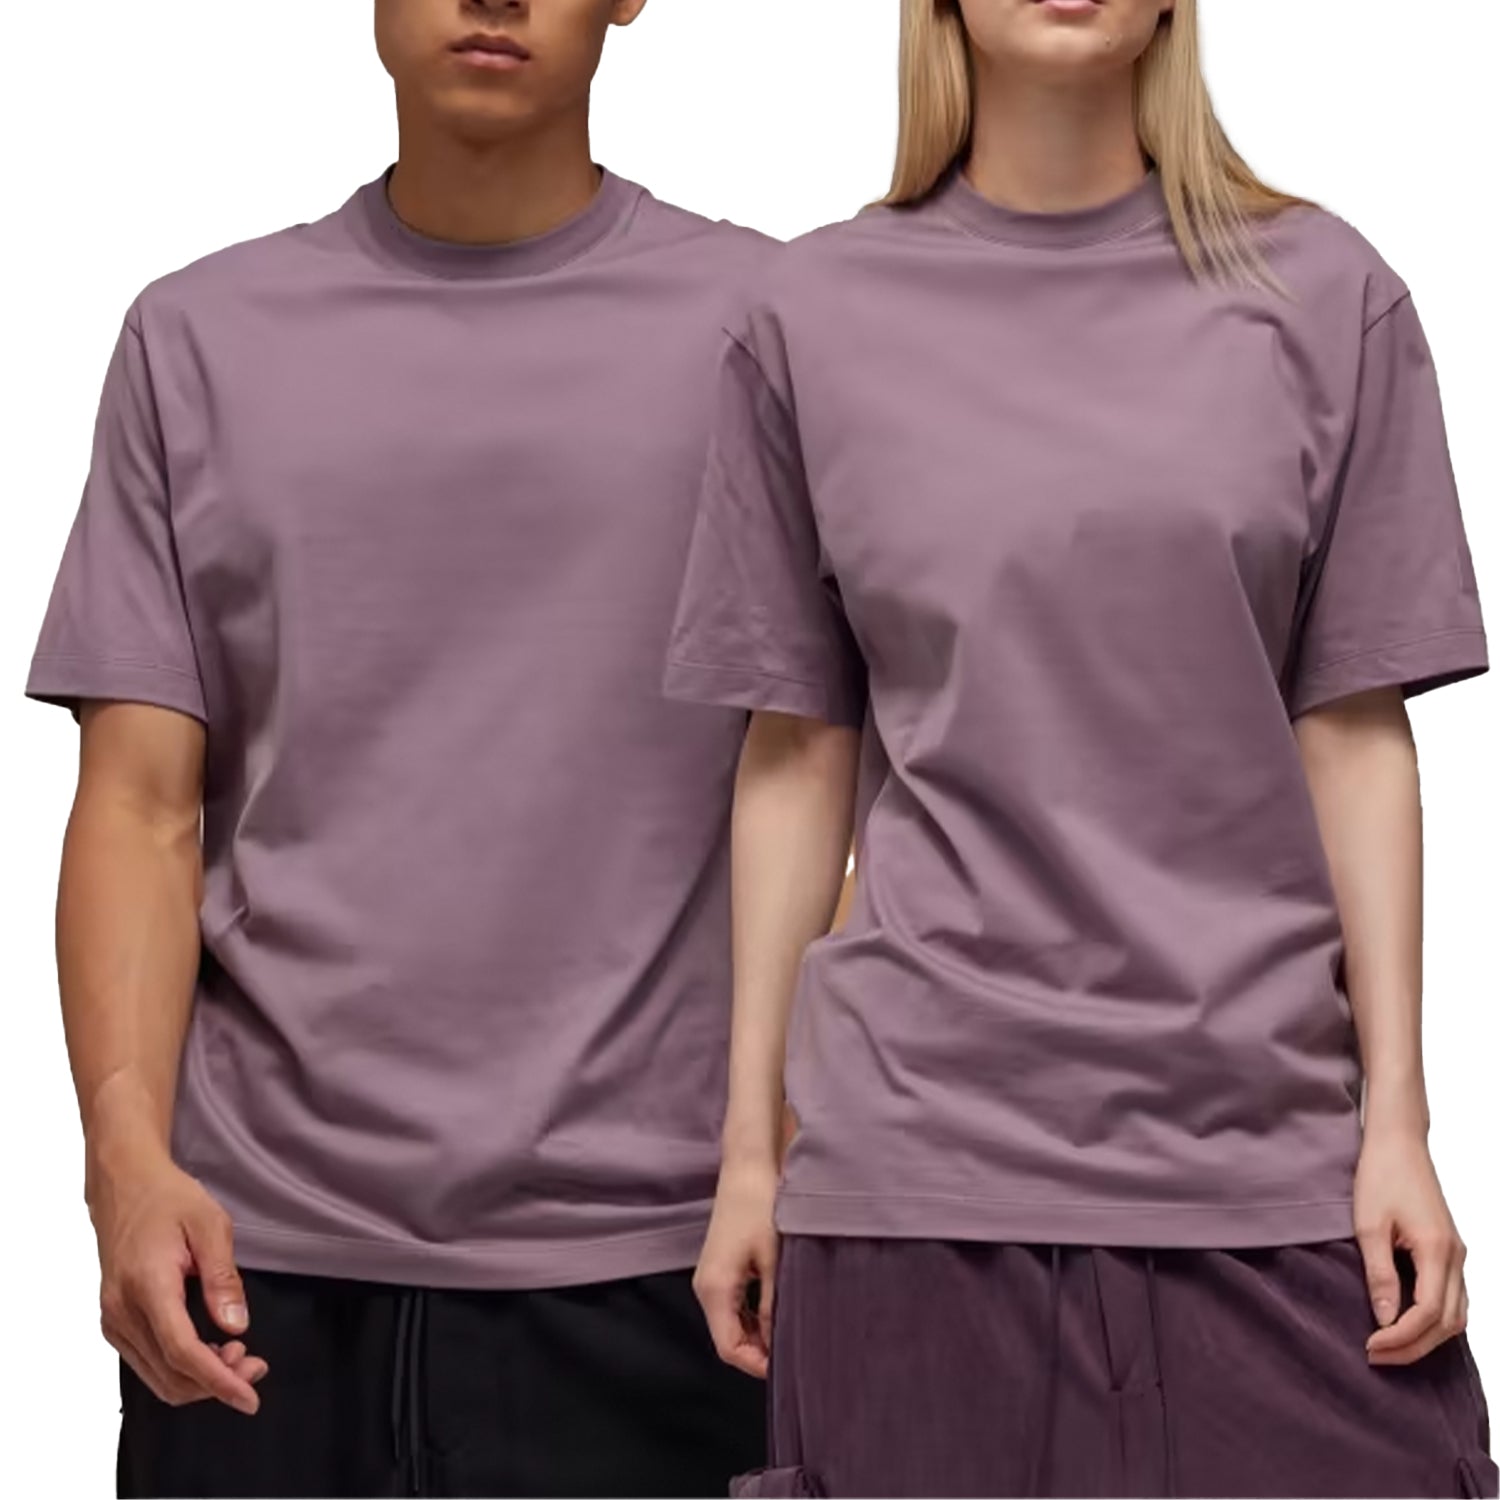 Y-3 Relaxed Short Sleeve Tee - INVINCIBLE